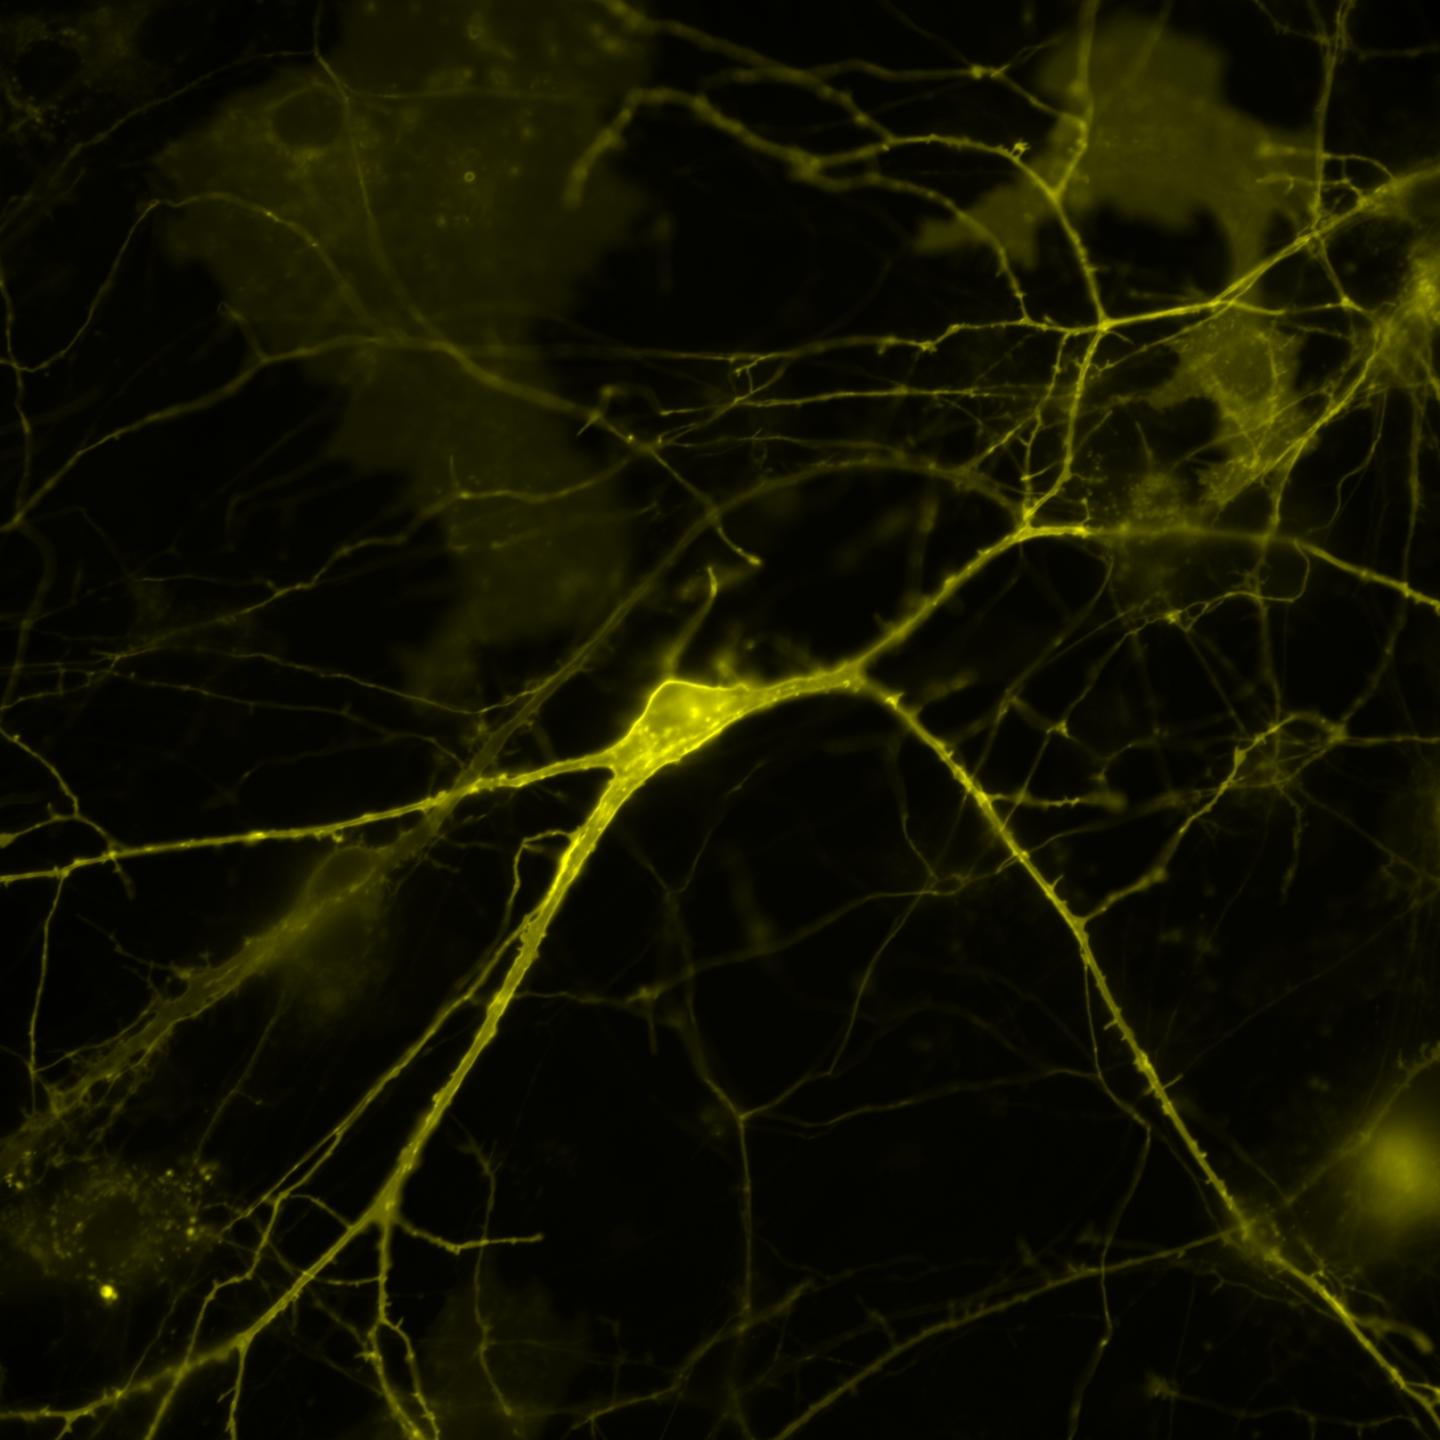 Voltron in a Mouse Neuron